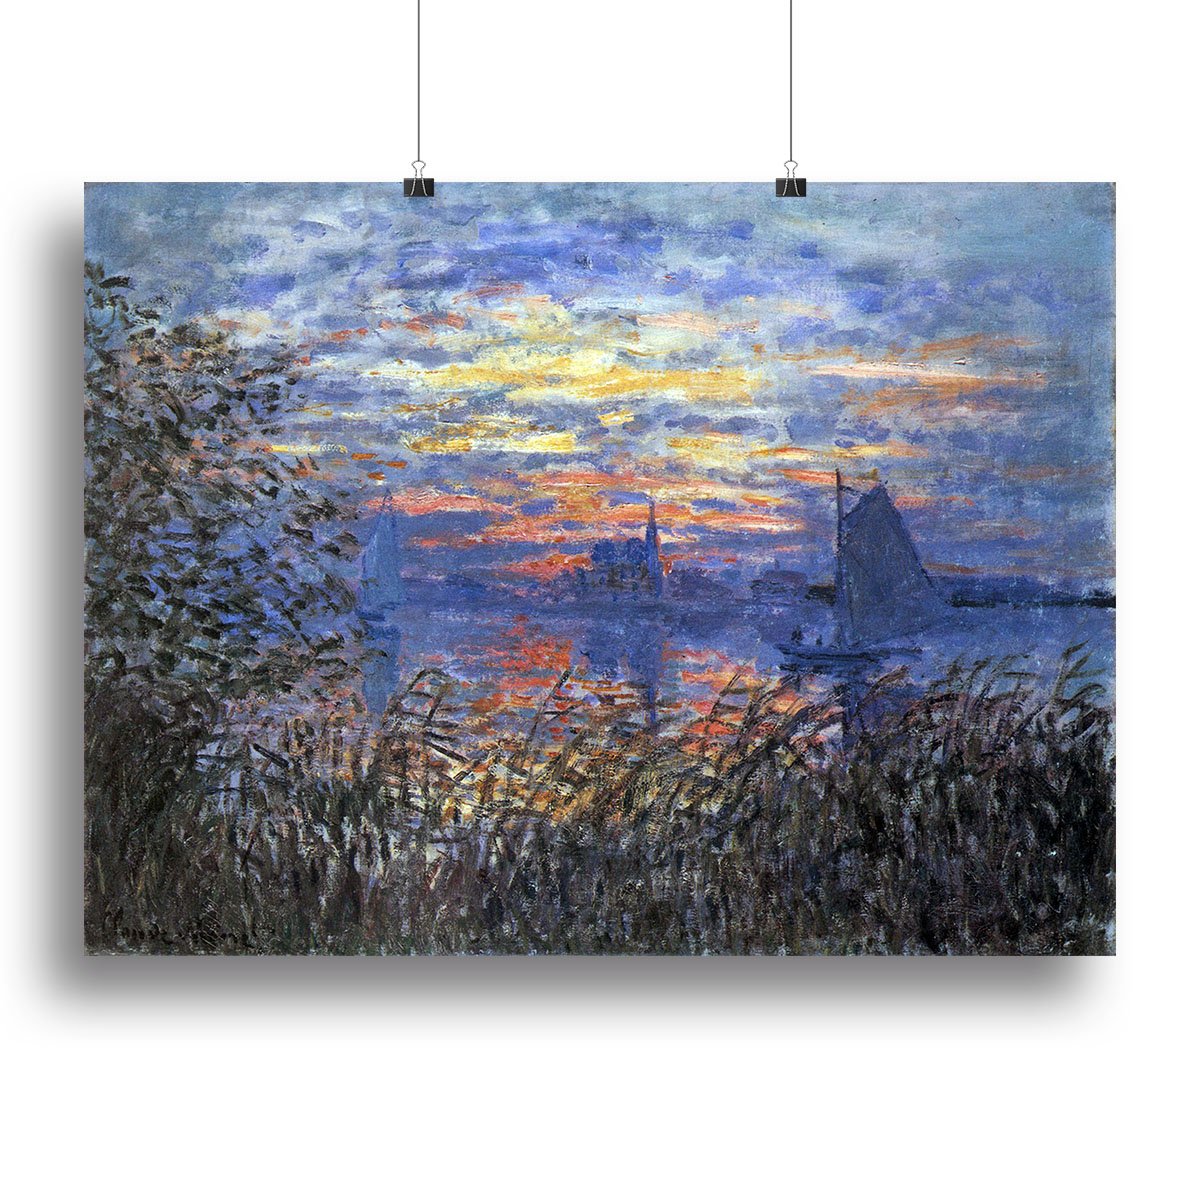 Sunset on the Seine by Monet Canvas Print or Poster